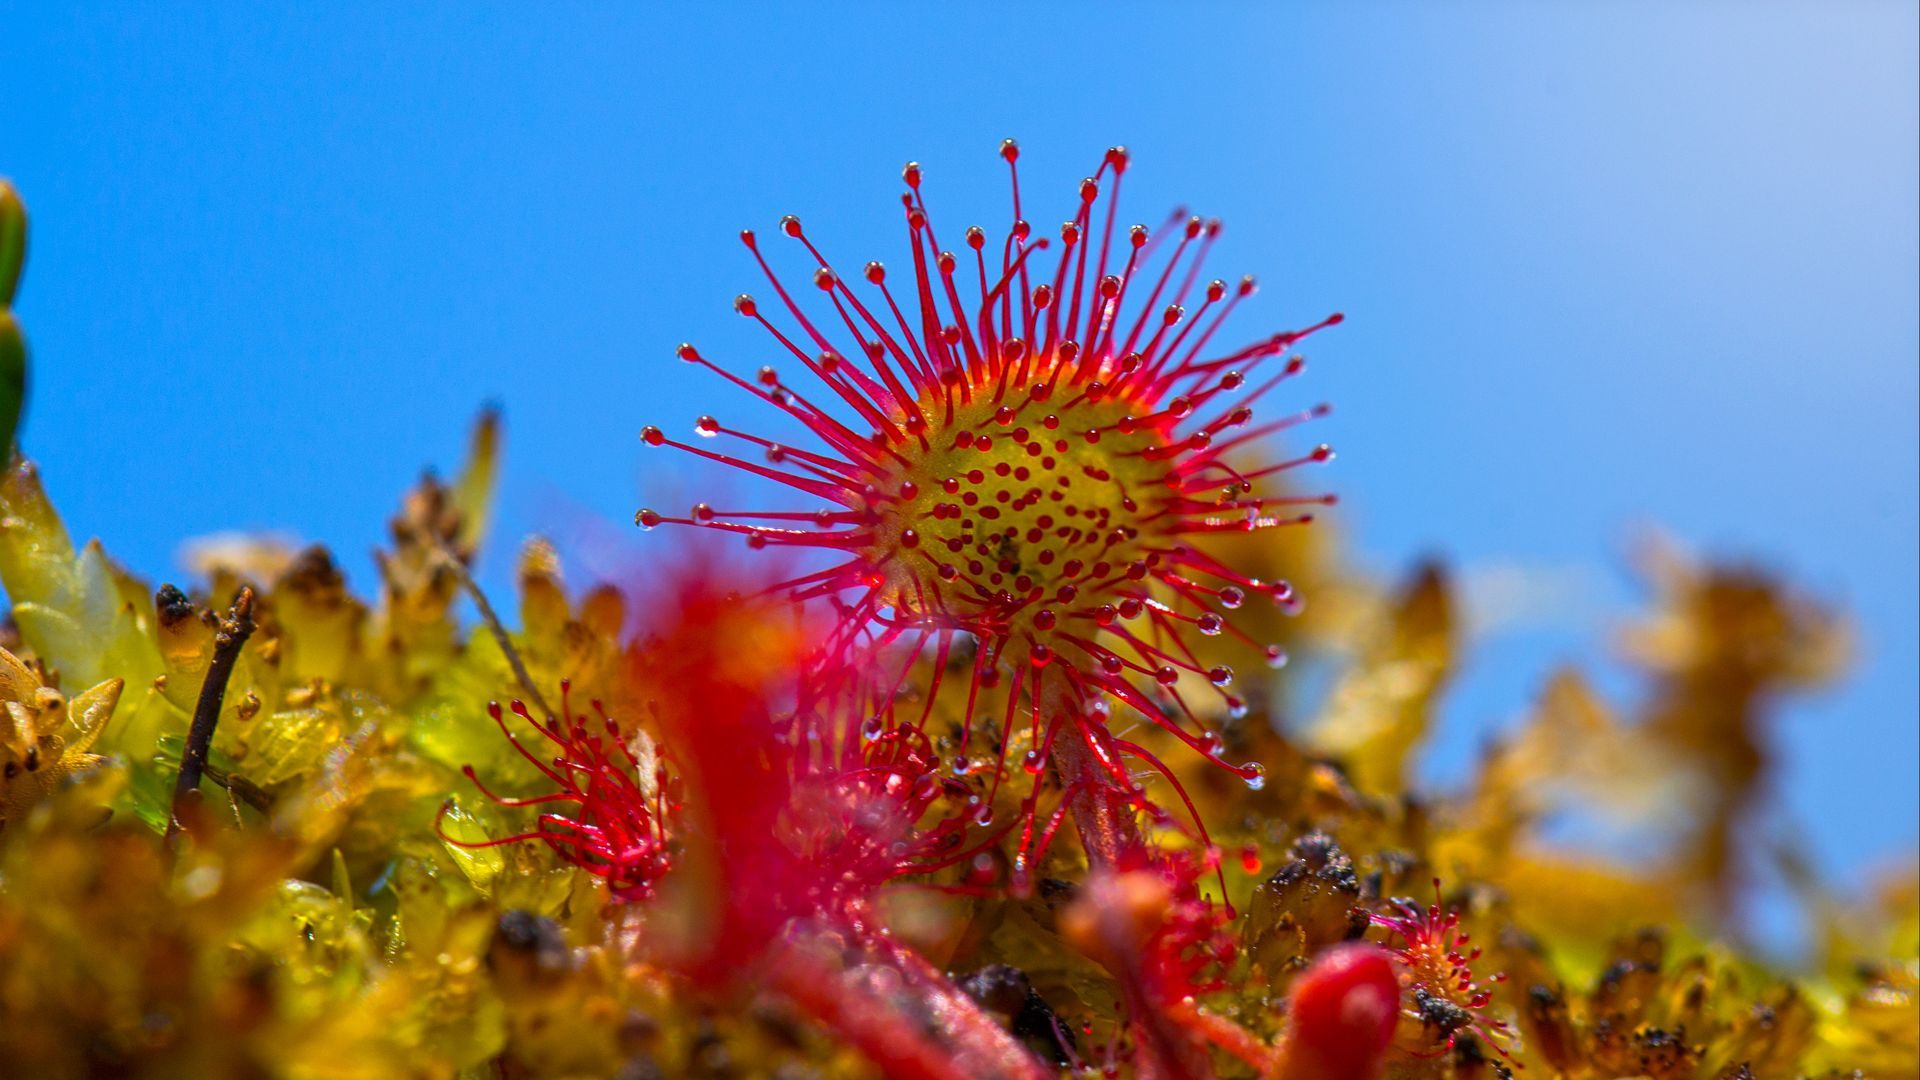 Download Wallpaper 1920x1080 Sundew, Plant, Close Up Full Hd, Hdtv, Fhd, 1080p HD Background